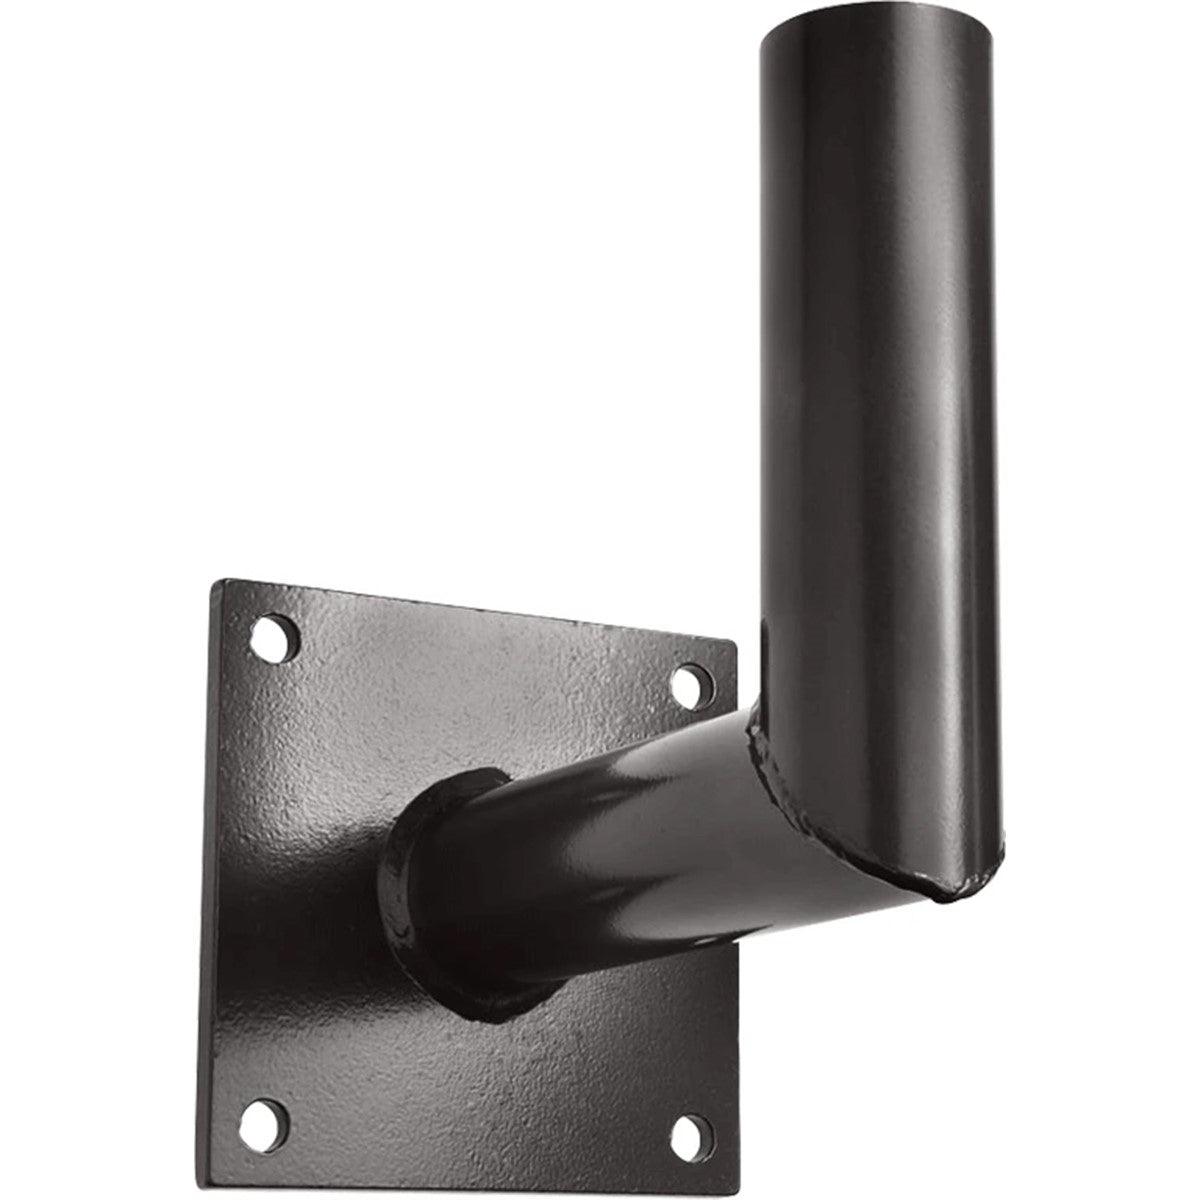 RAB Lighting MAB Poles Bracket Right Angle Wall Mount 8 1/2 Inch X 8 Inches, Bronze Finish - Bees Lighting